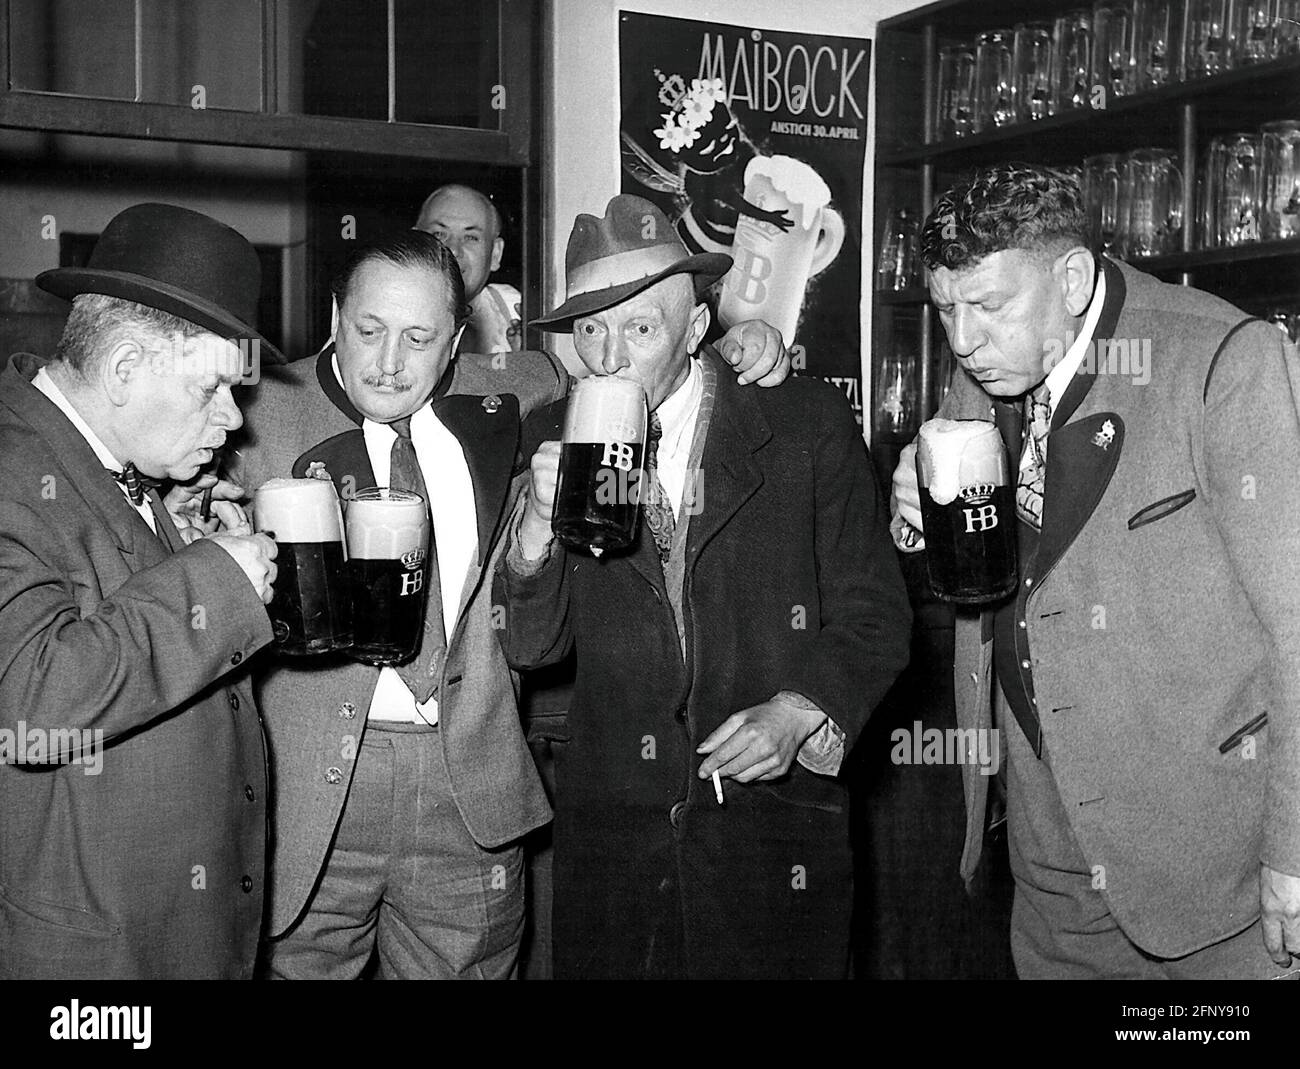 gastronomy, pubs, men drinking Bock beer, Hofbraeuhaus, Munich, Germany, 1953, ADDITIONAL-RIGHTS-CLEARANCE-INFO-NOT-AVAILABLE Stock Photo